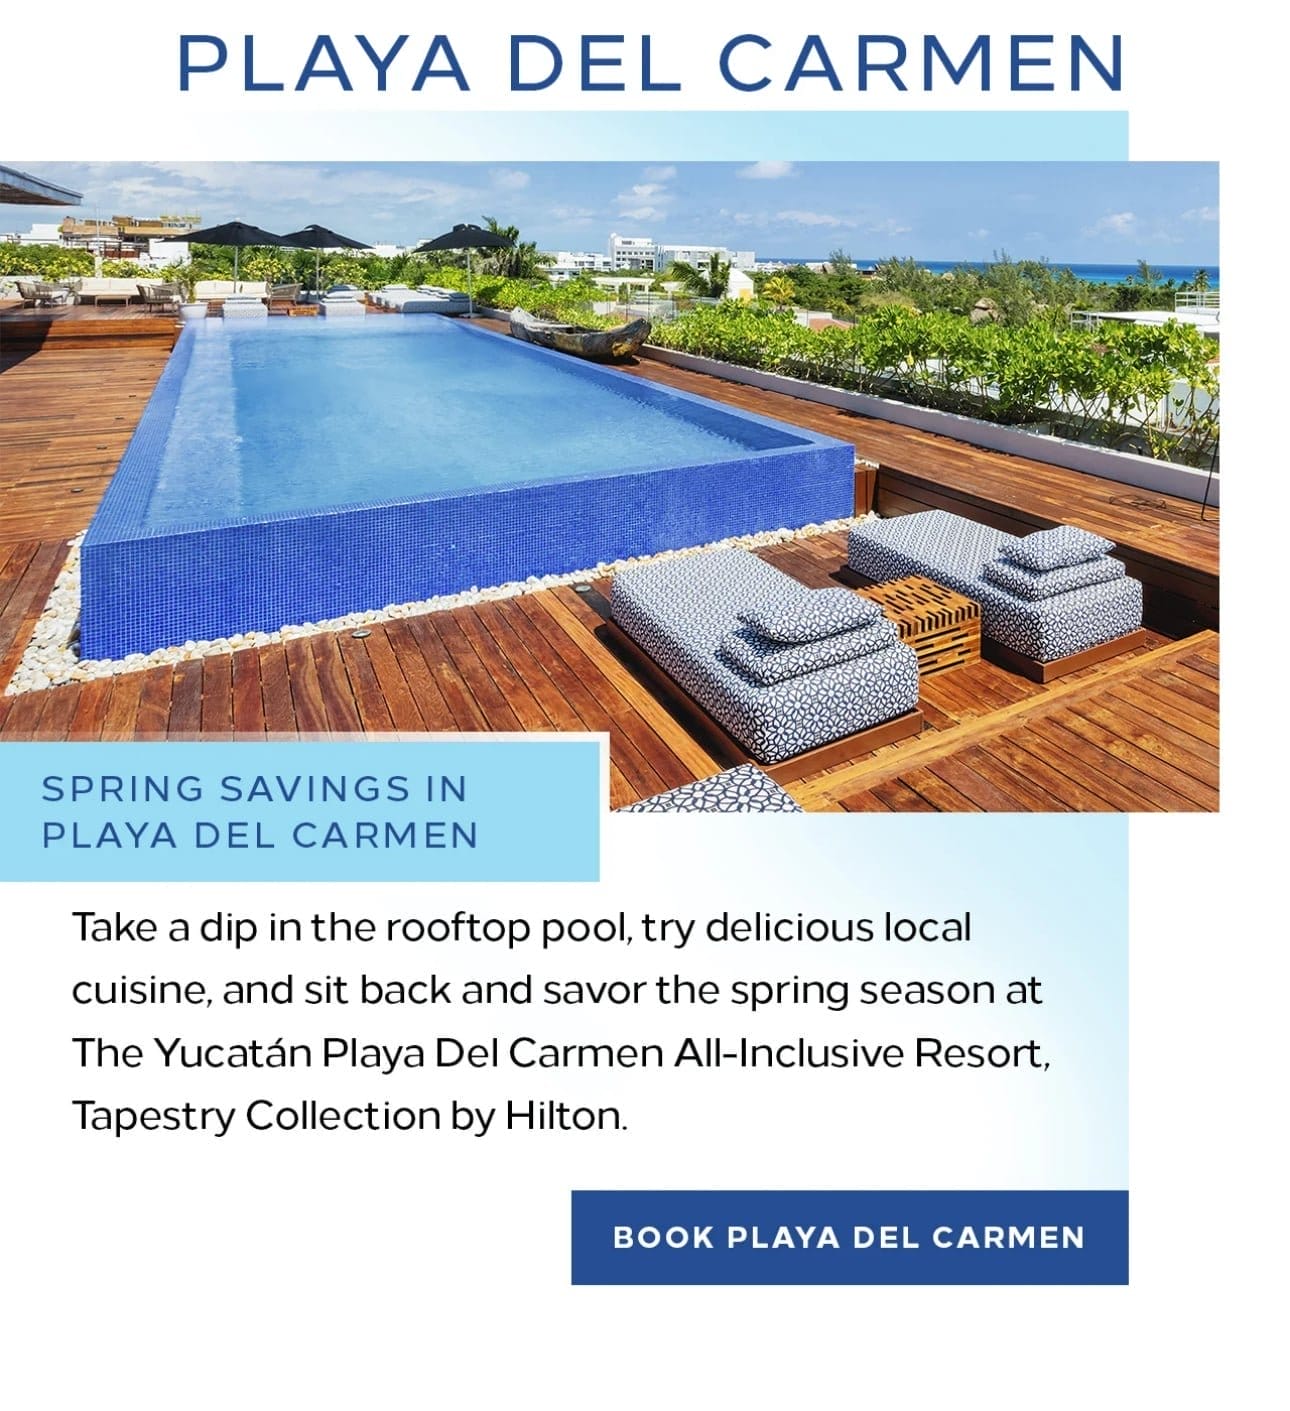  Playa Del Carmen. Take a dip in the rooftop pool, try delicious local cuisine, and sit back and savor the spring season at The Yucatán Playa Del Carmen All-Inclusive Resort, Tapestry Collection by Hilton. Book Playa Del Carmen. 